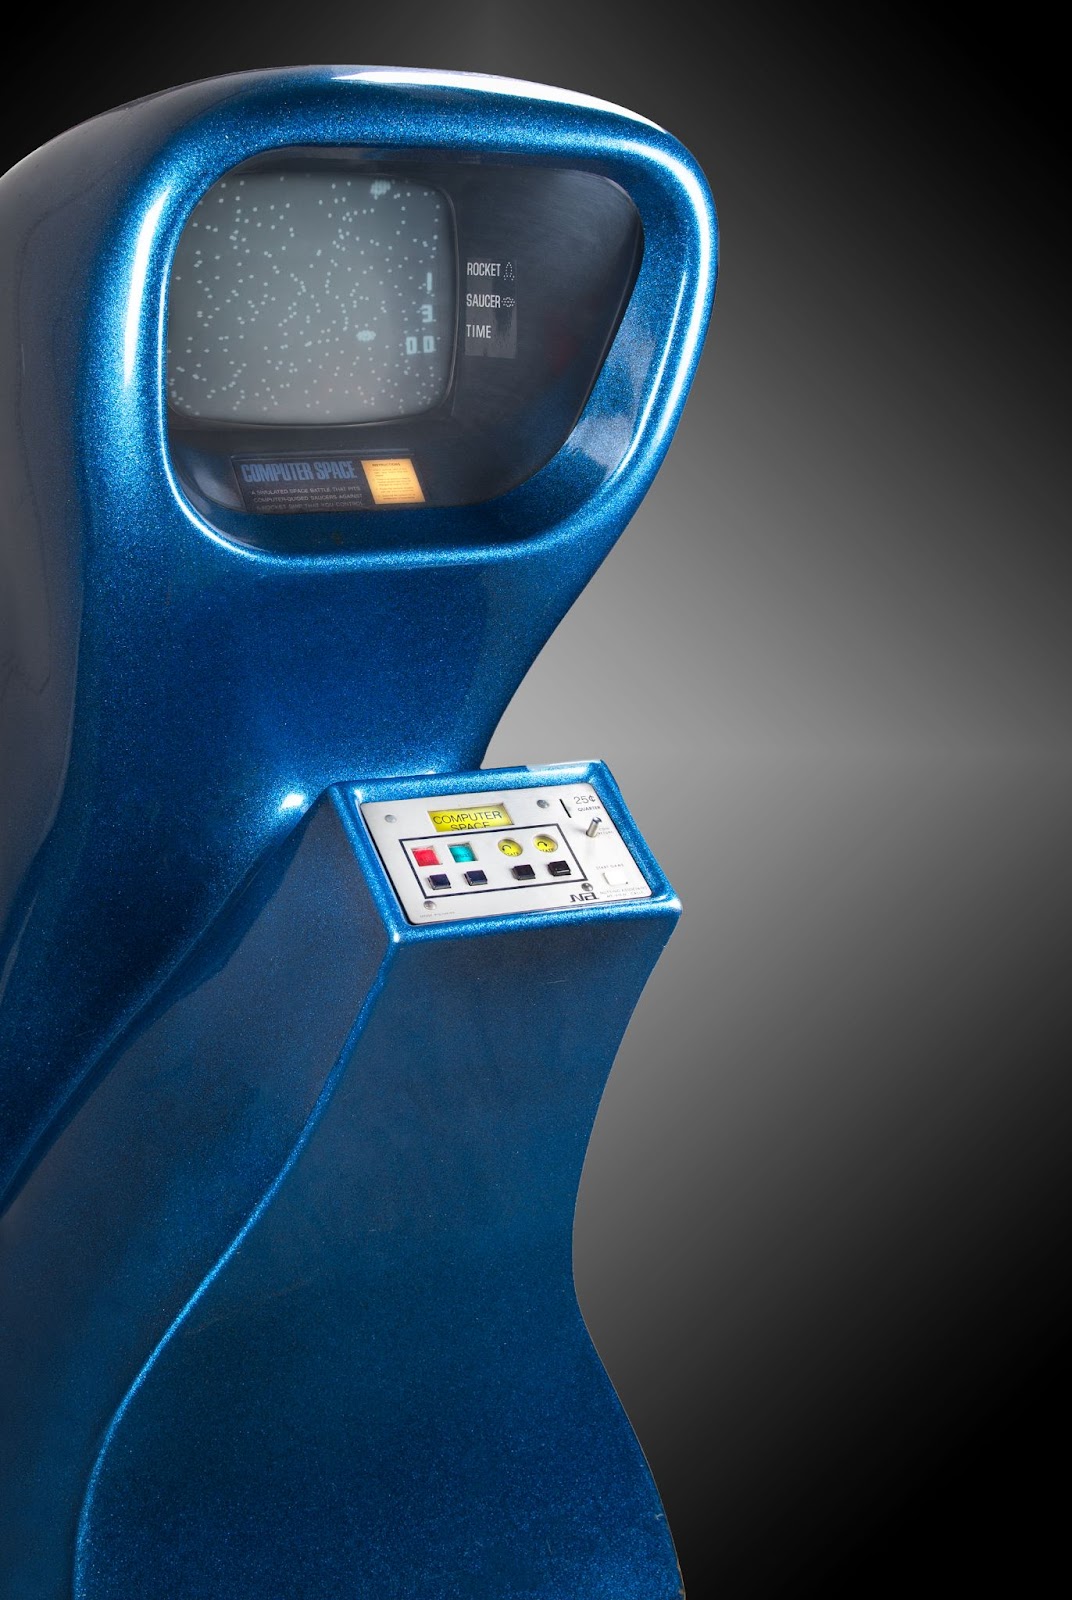 Original, fully-functioning Computer Space arcade console featuring its vibrant sparkly blue finish.